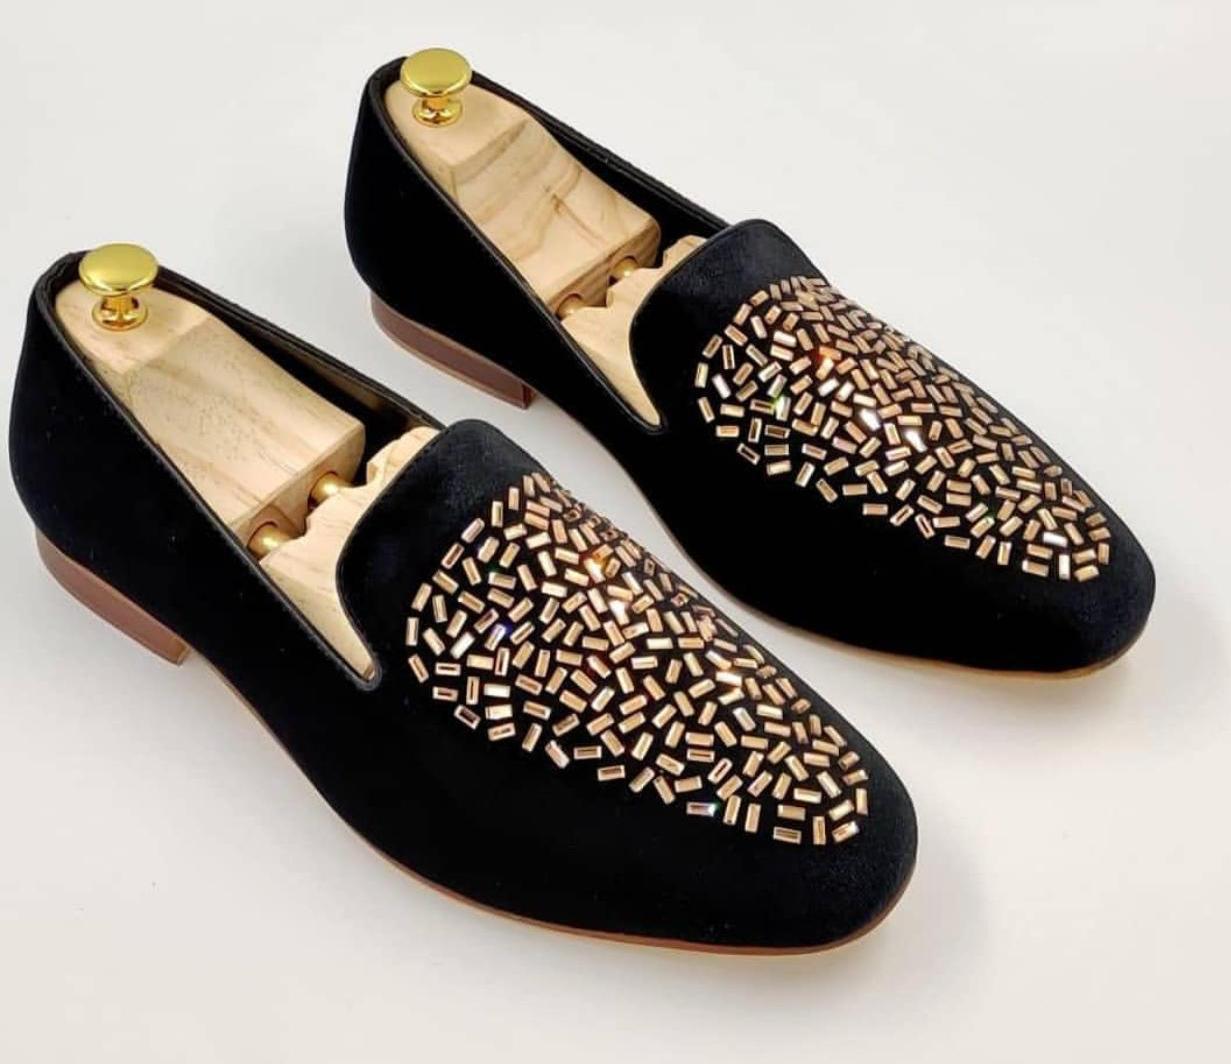 Arrival Fashion Studded Suede Loafer Shoes For Partywear And Casualwear - FunkyTradition